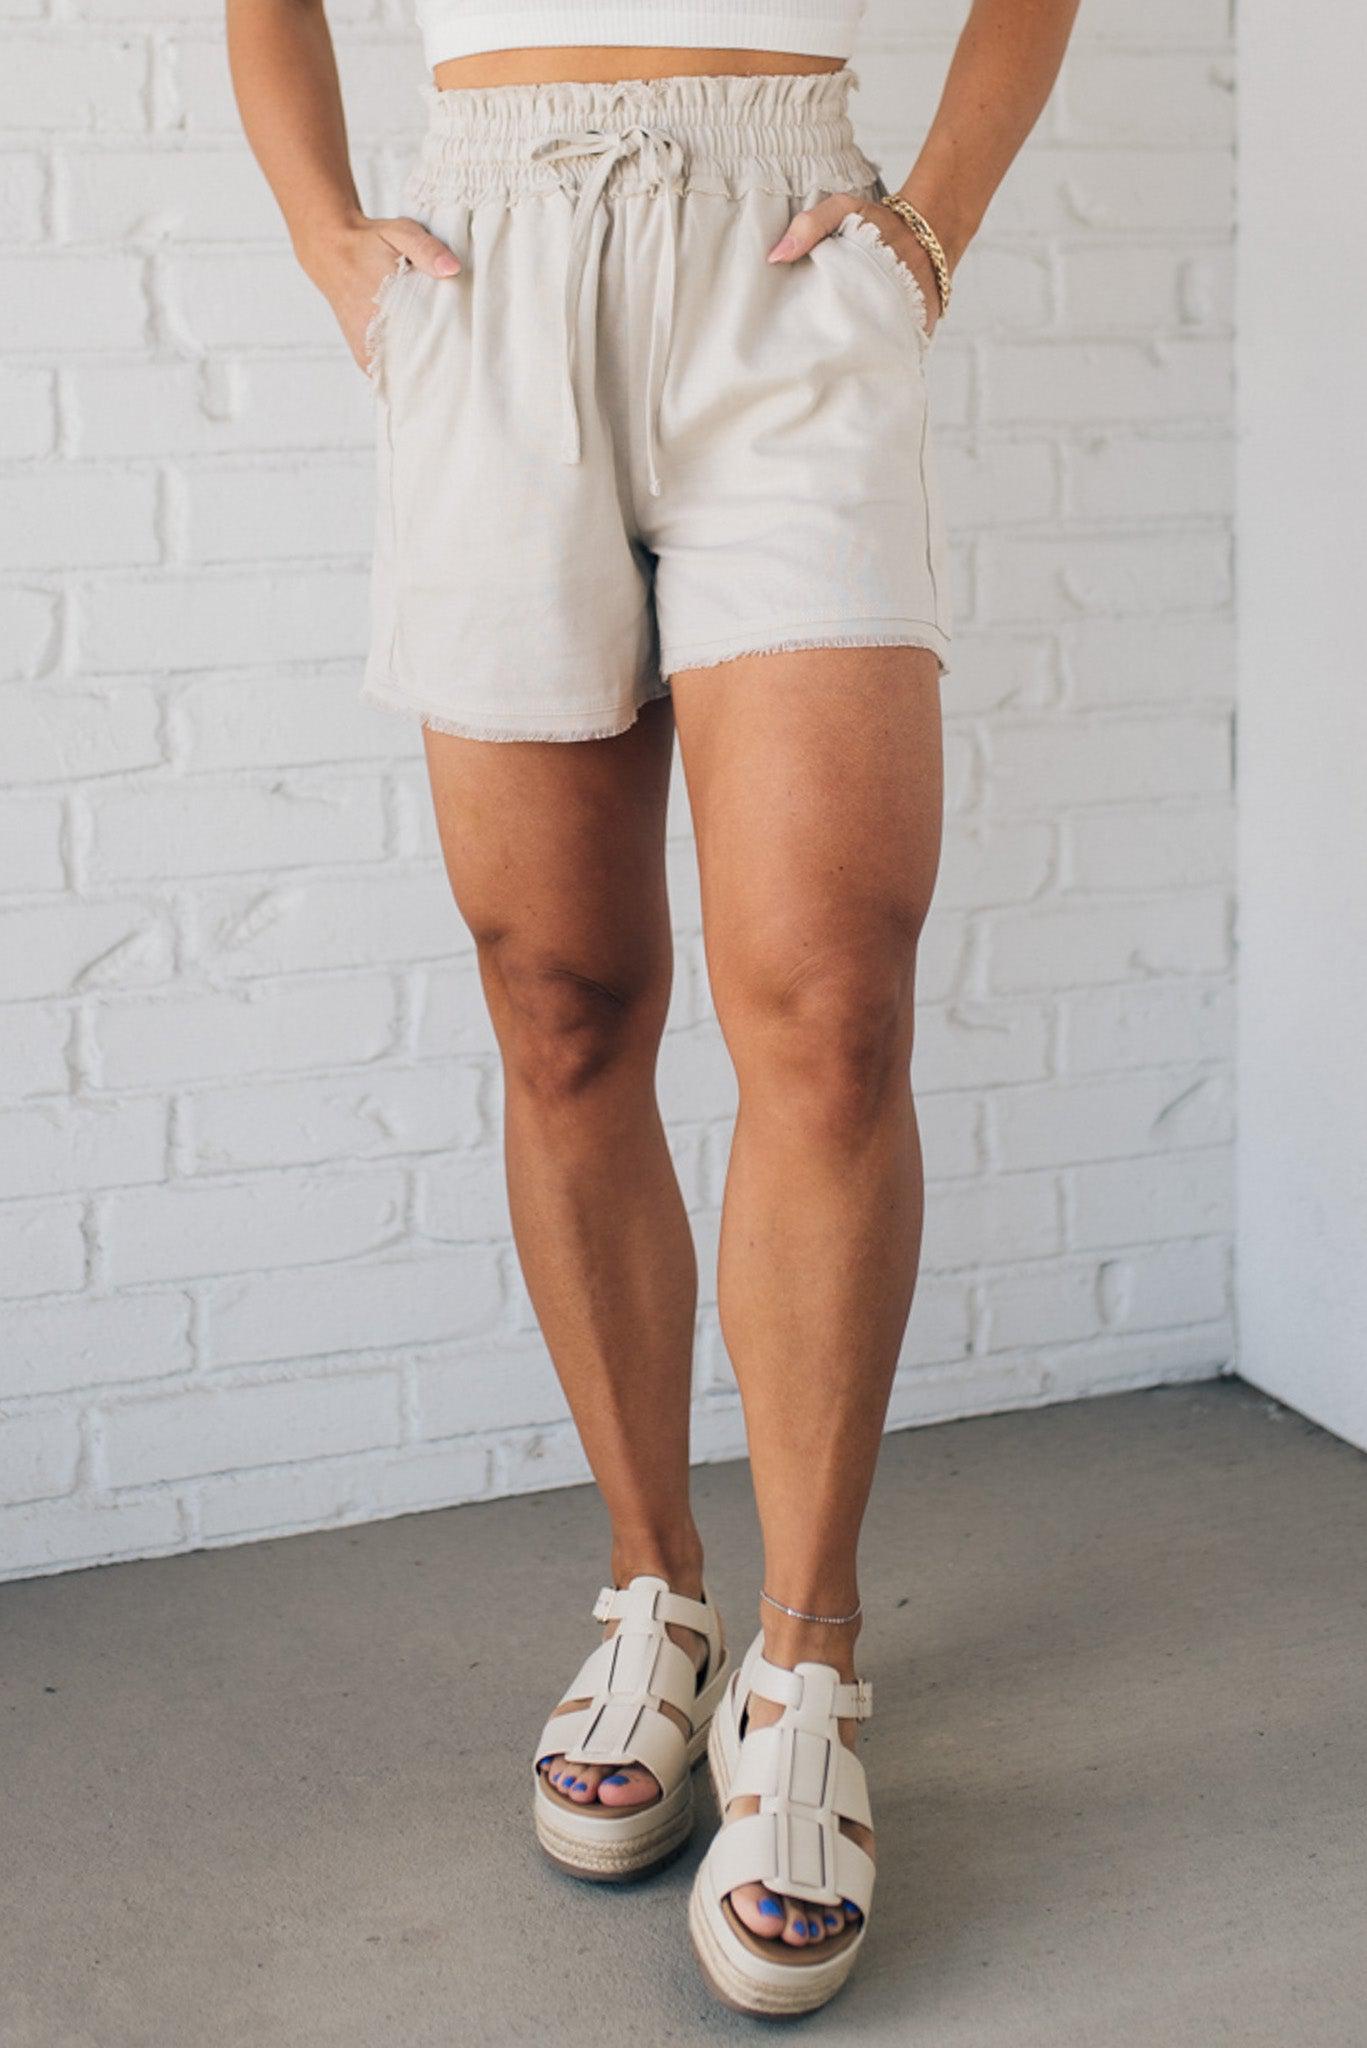 Linen blend natural color shorts with drawstring waist band and smocked detail.